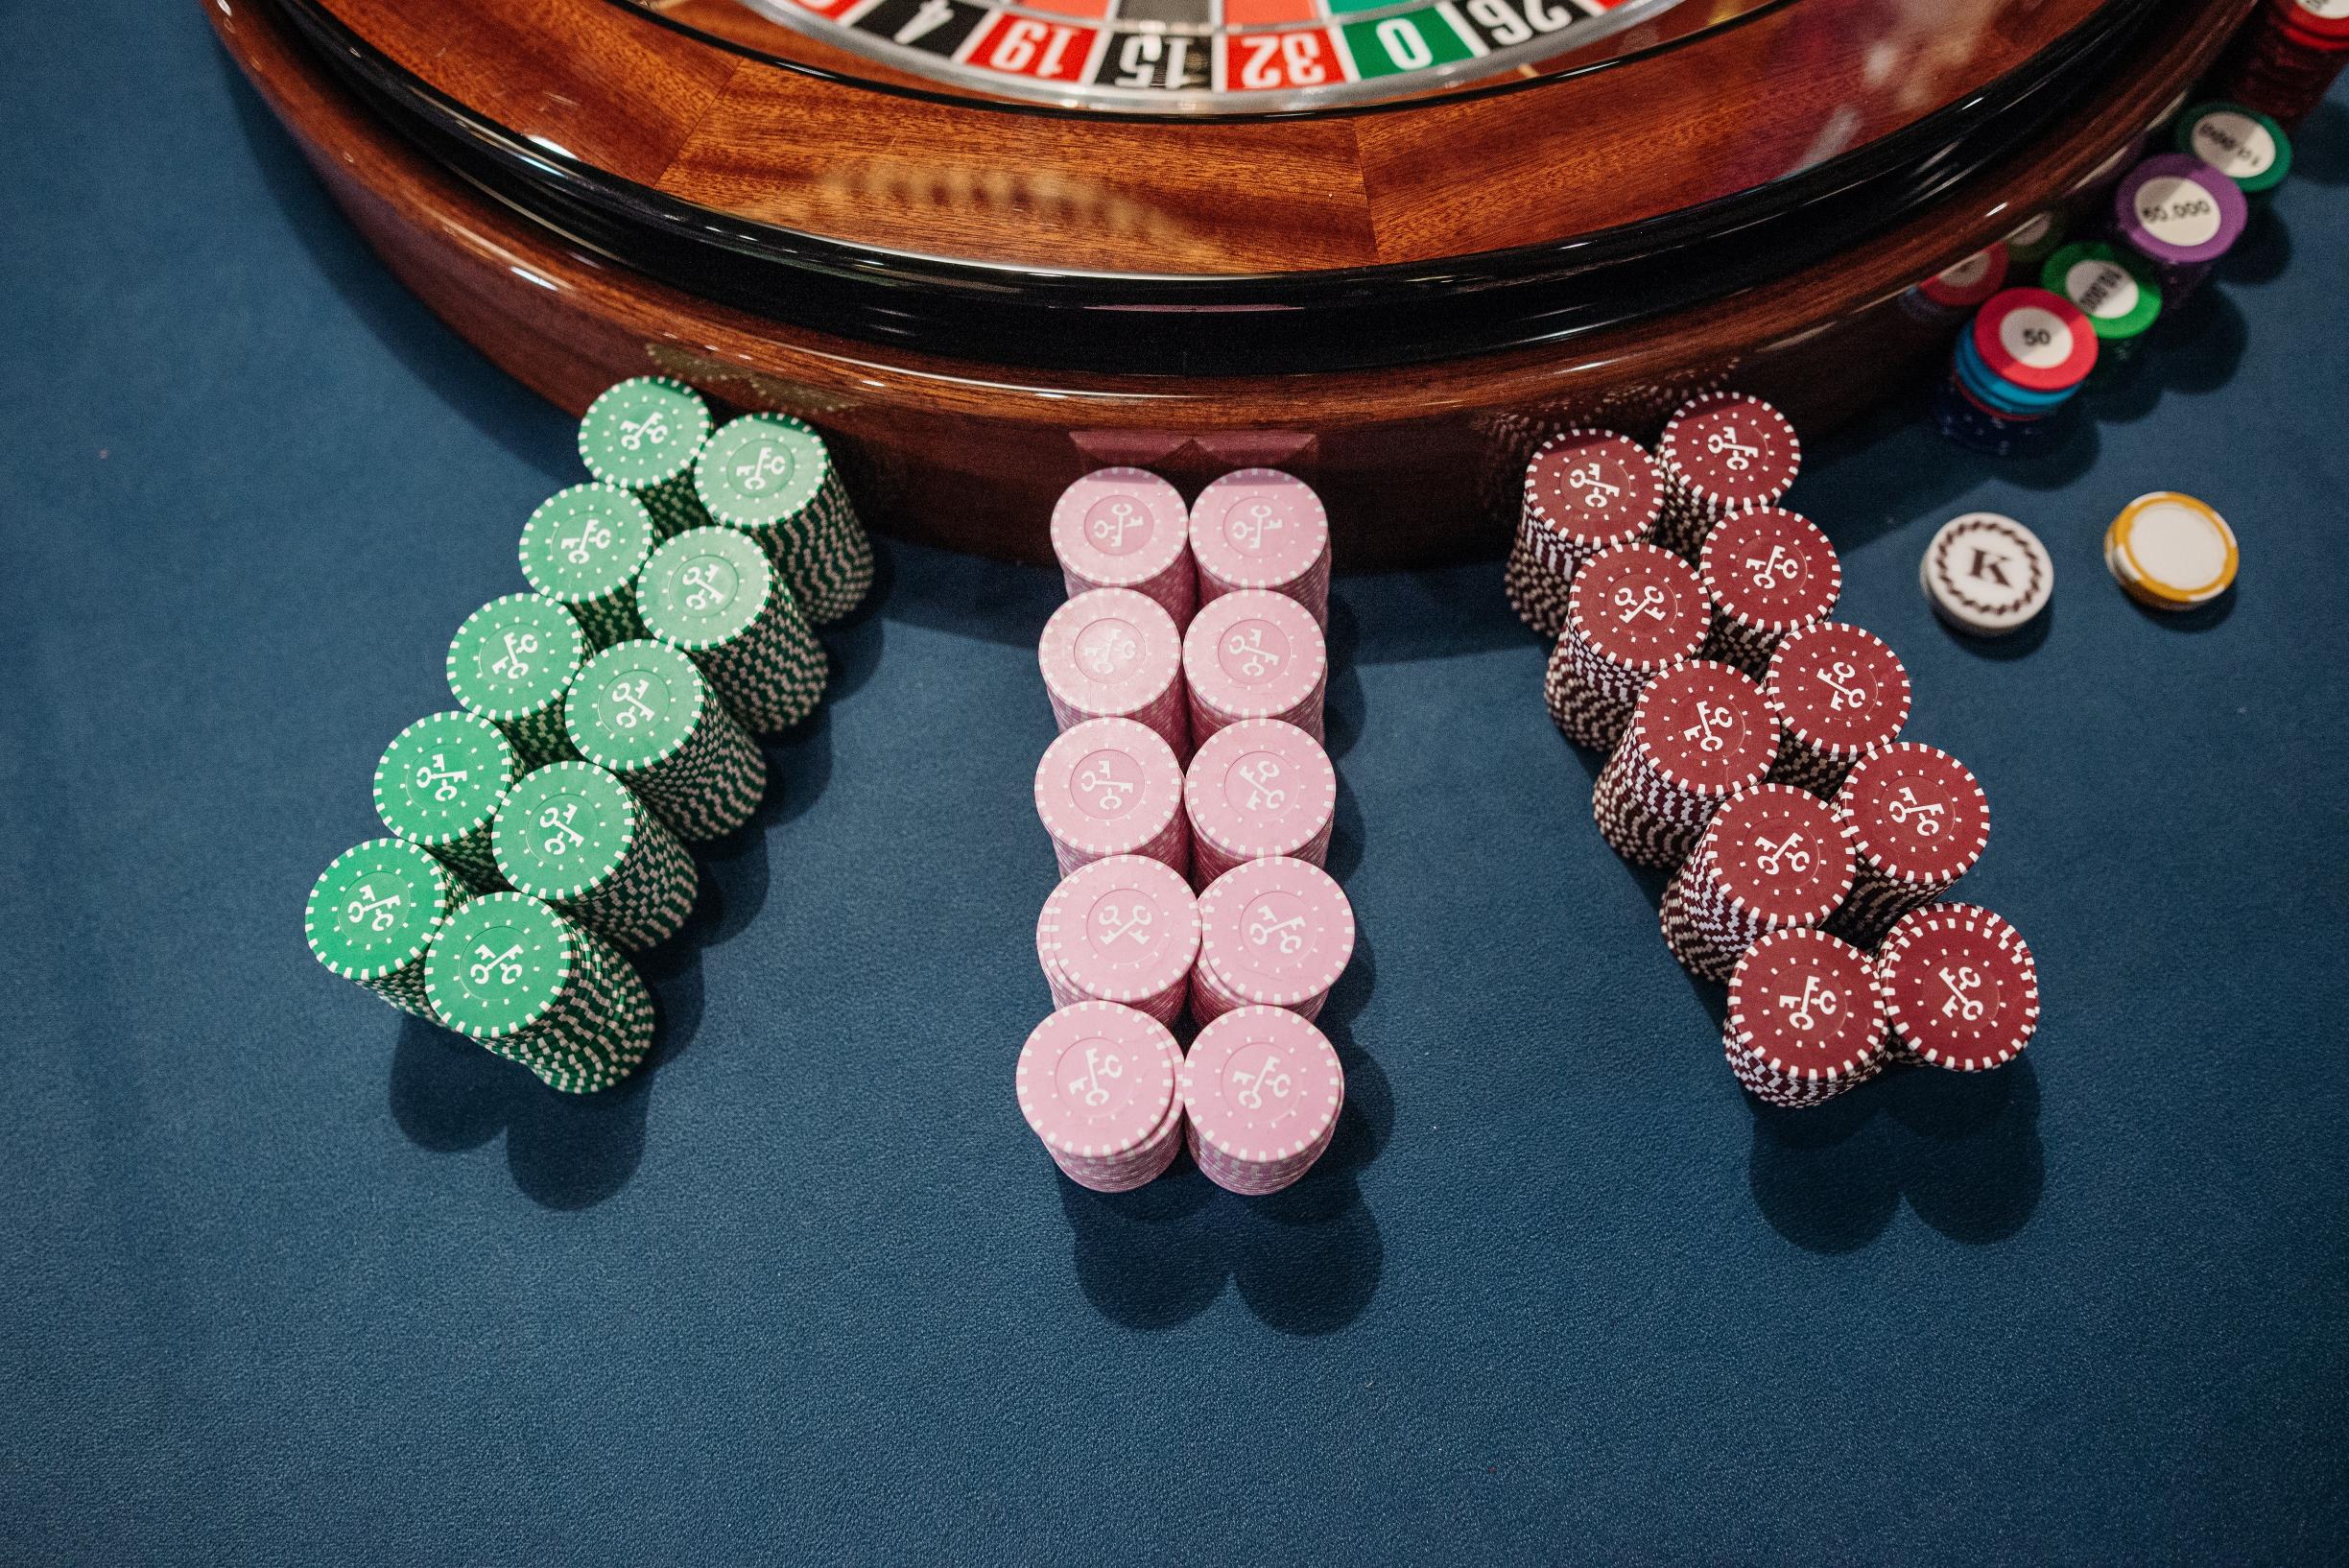 Blackjack Myths: Separating Fact from Fiction